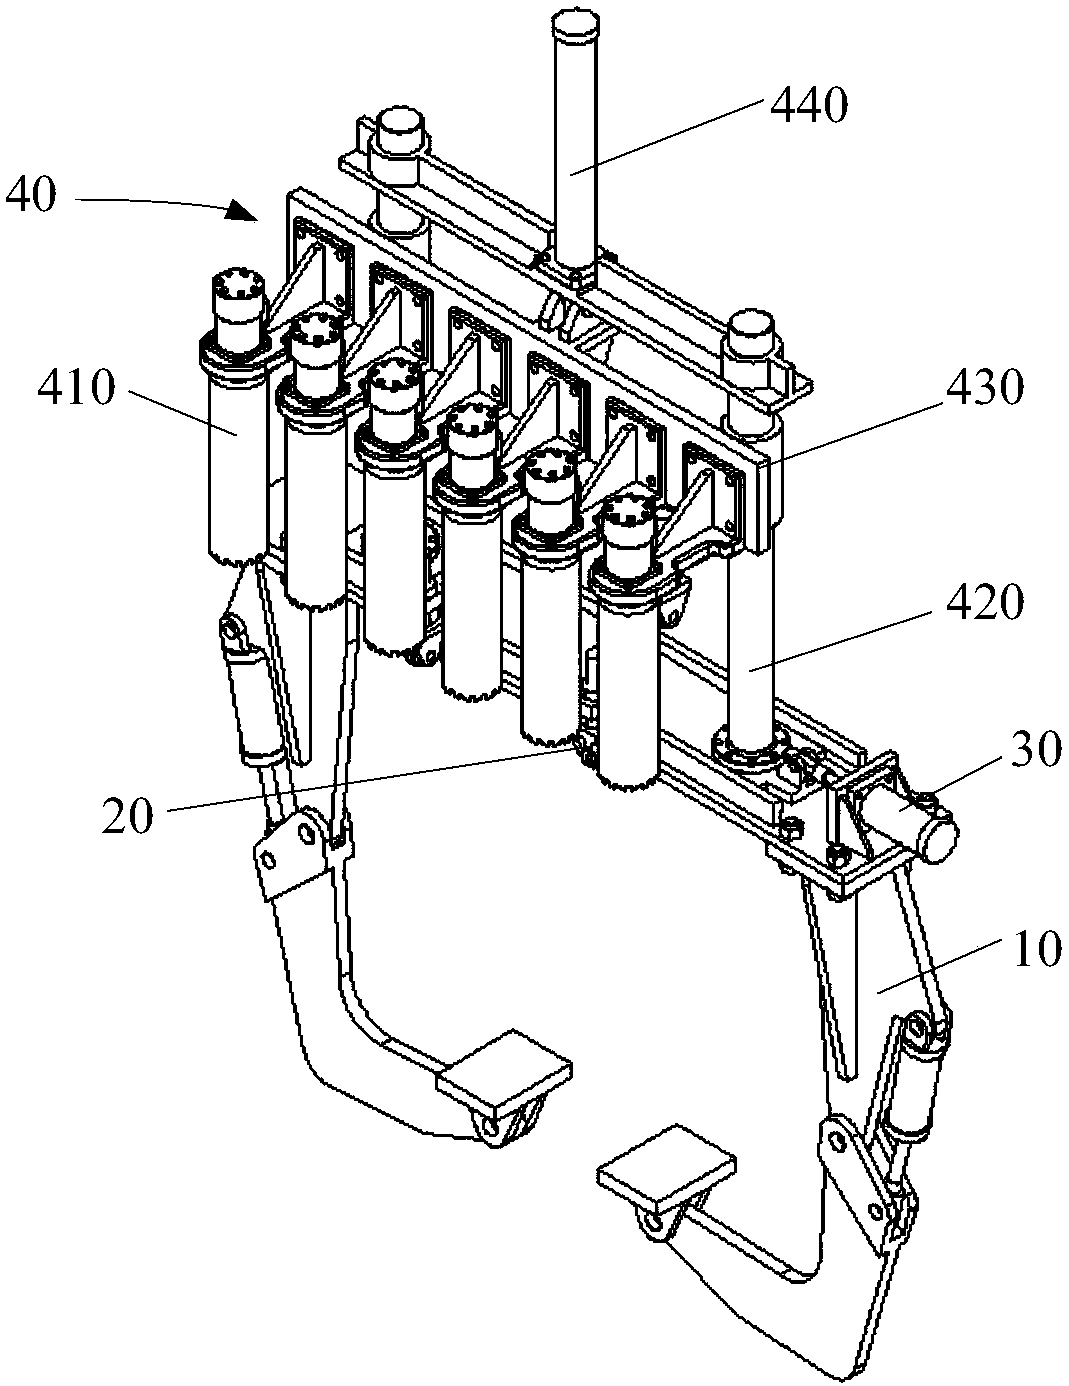 Environmental-friendly efficient fully-hydraulic static cutting device and method for concrete temporary supporting beams